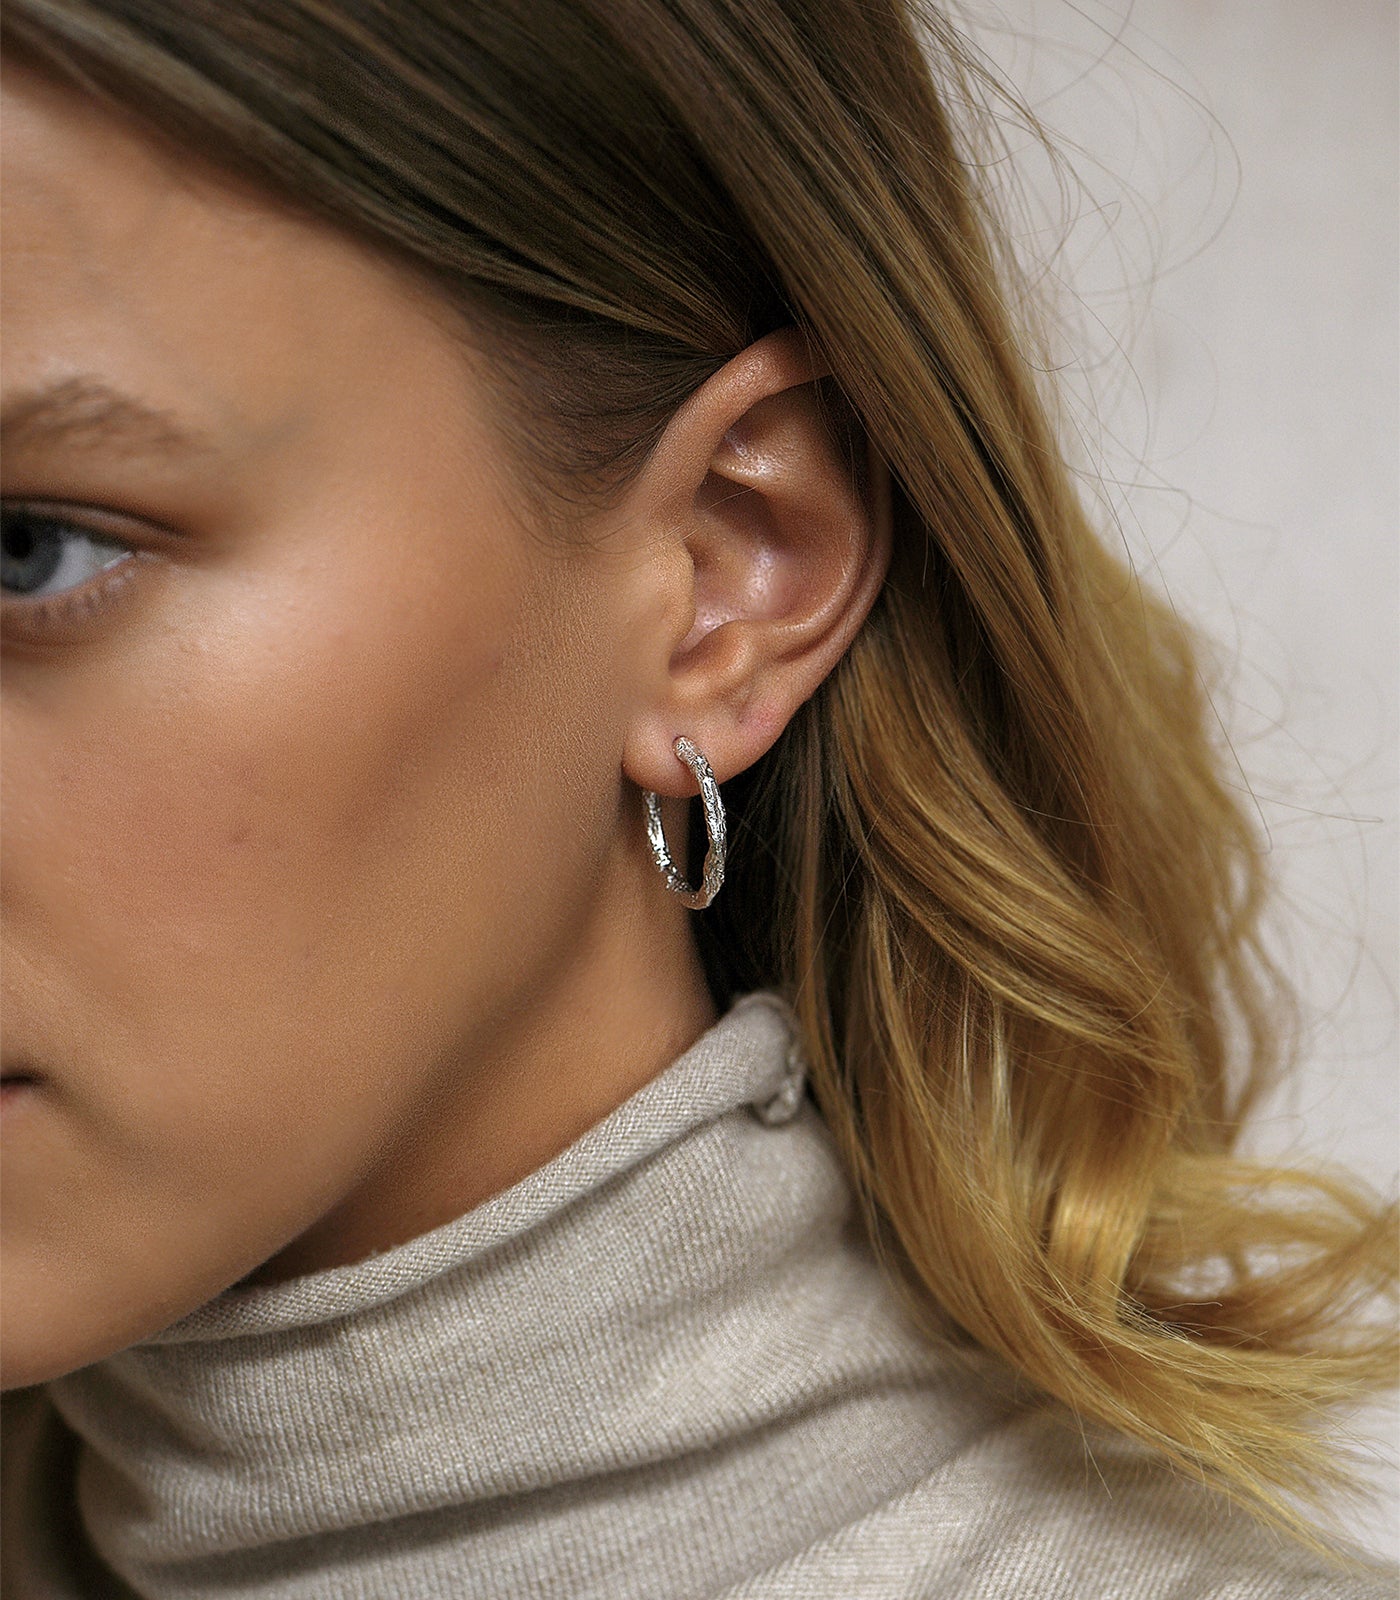 A sterling silver textured hoop earring. The hoop is small and thin, creating a sophisticated look.